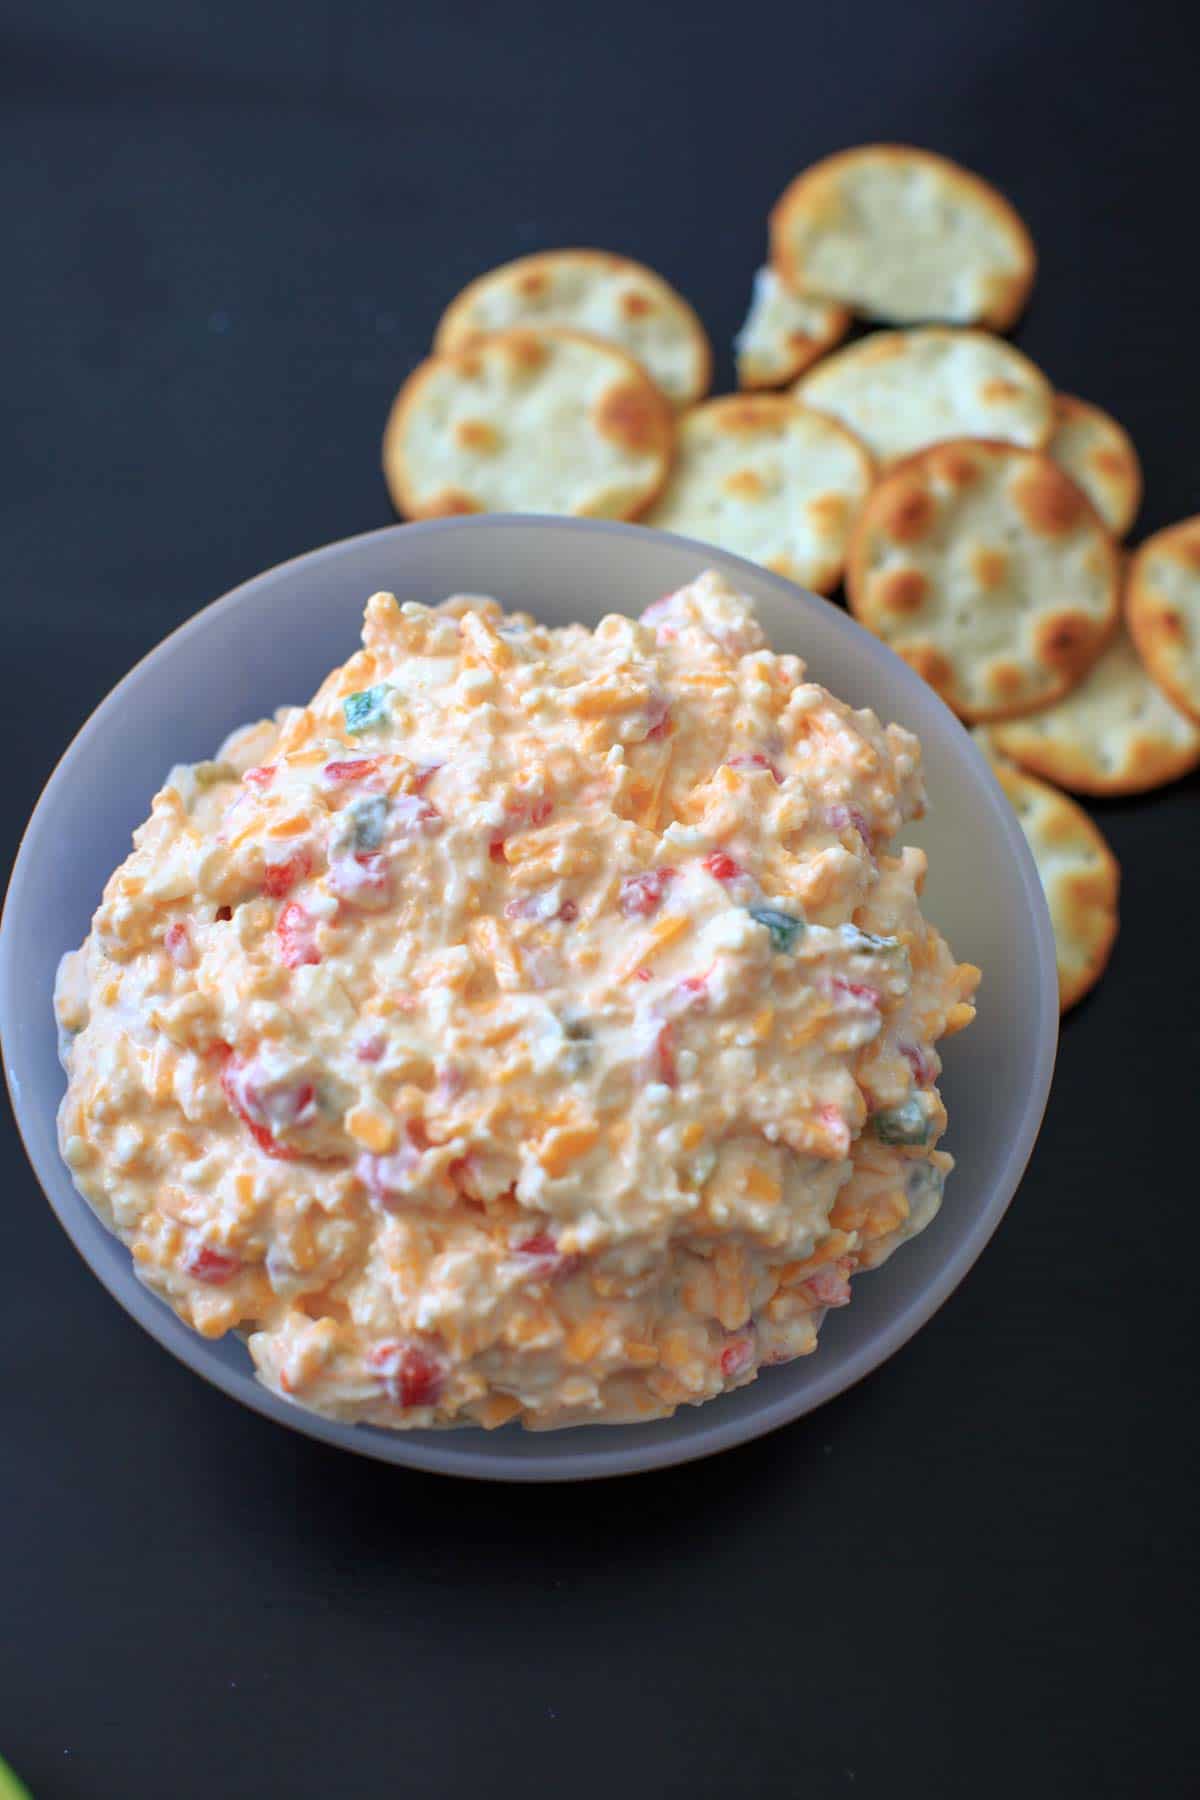 Skinny Jalapeno Pimento Cheese - a spicy, healthier take on the southern favorite. No mayonnaise!